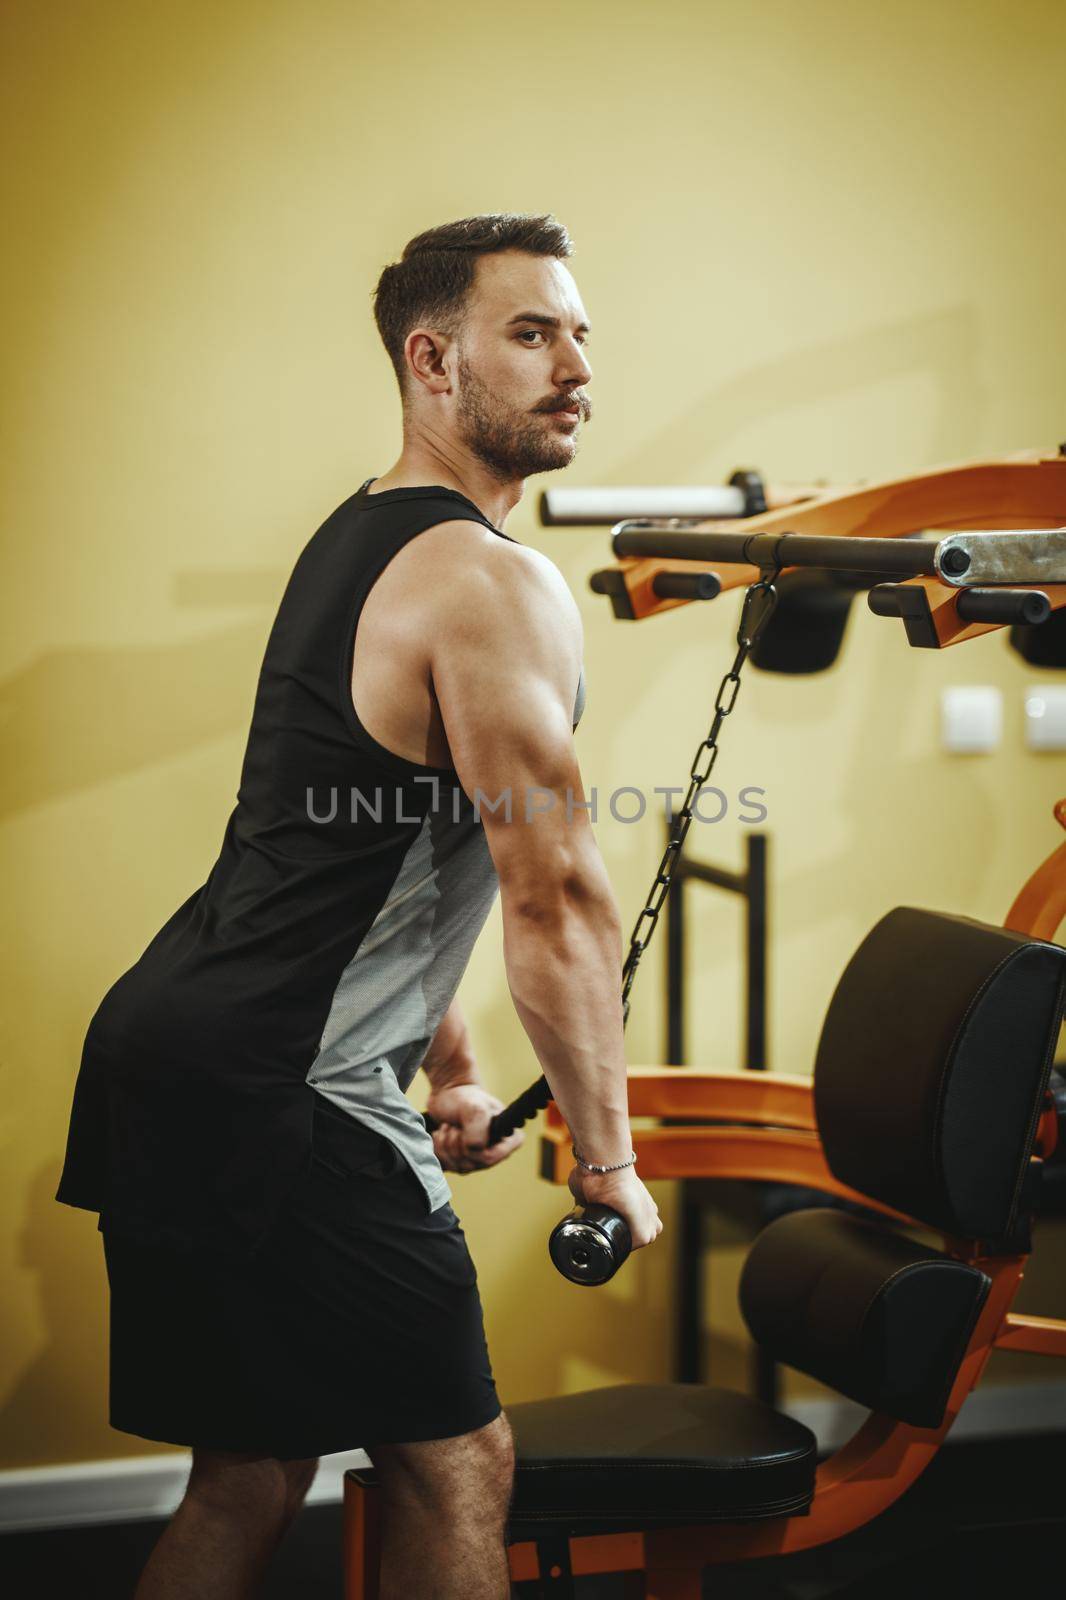 Shot of a muscular guy in sportswear working out on machine at the cross training gym. He is pumping up triceps muscule with heavy weight.